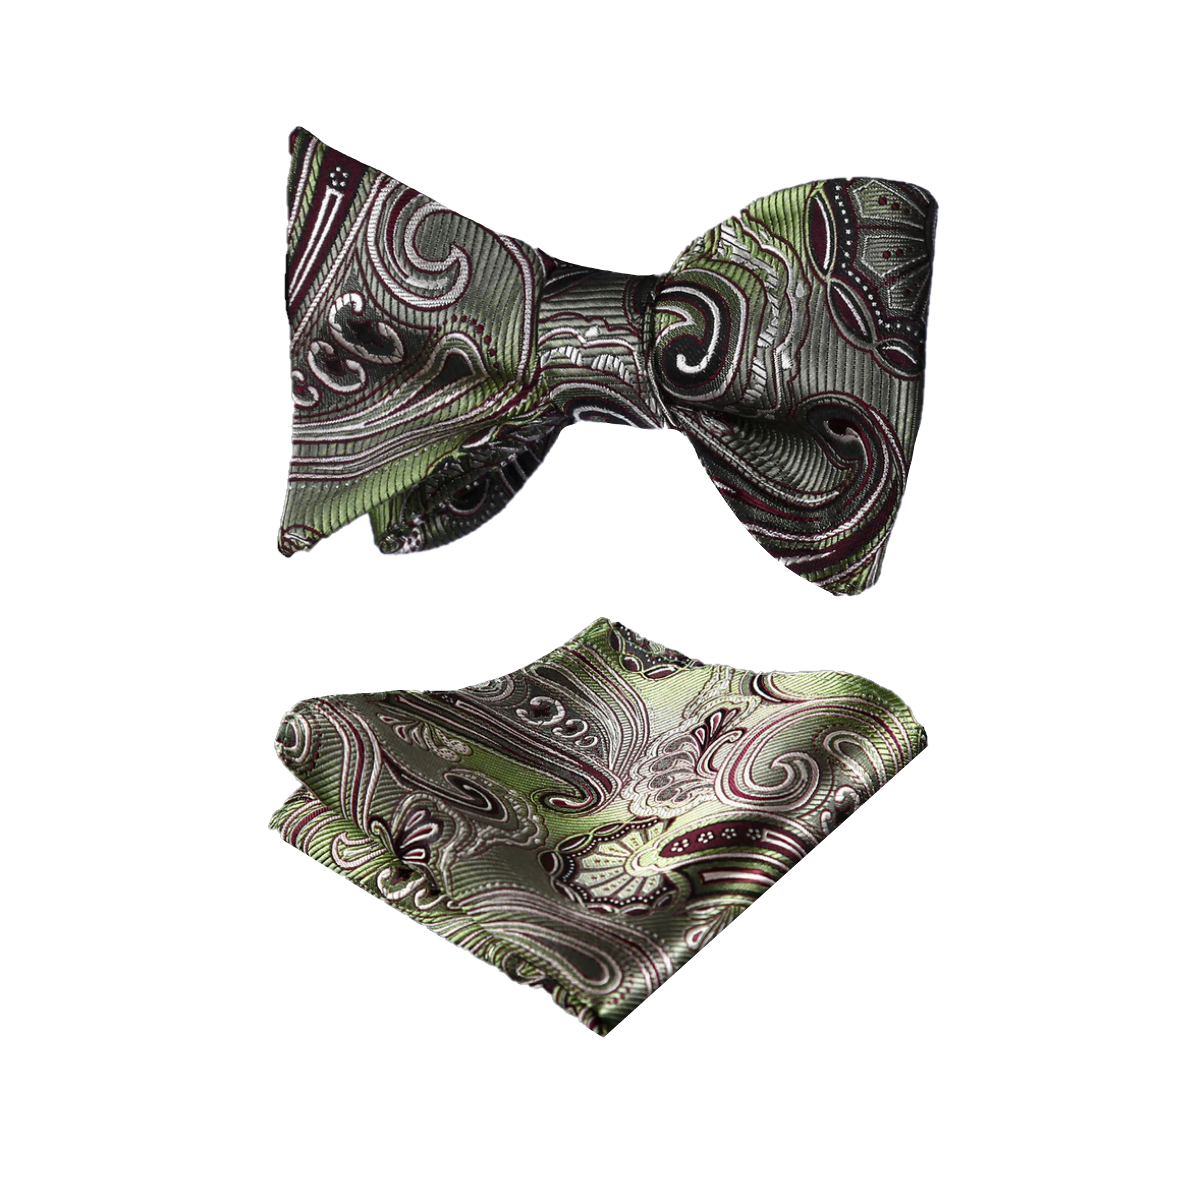 A Green, Burgundy Paisley Pattern Silk Bow Tie, Matching Silk Pocket Square